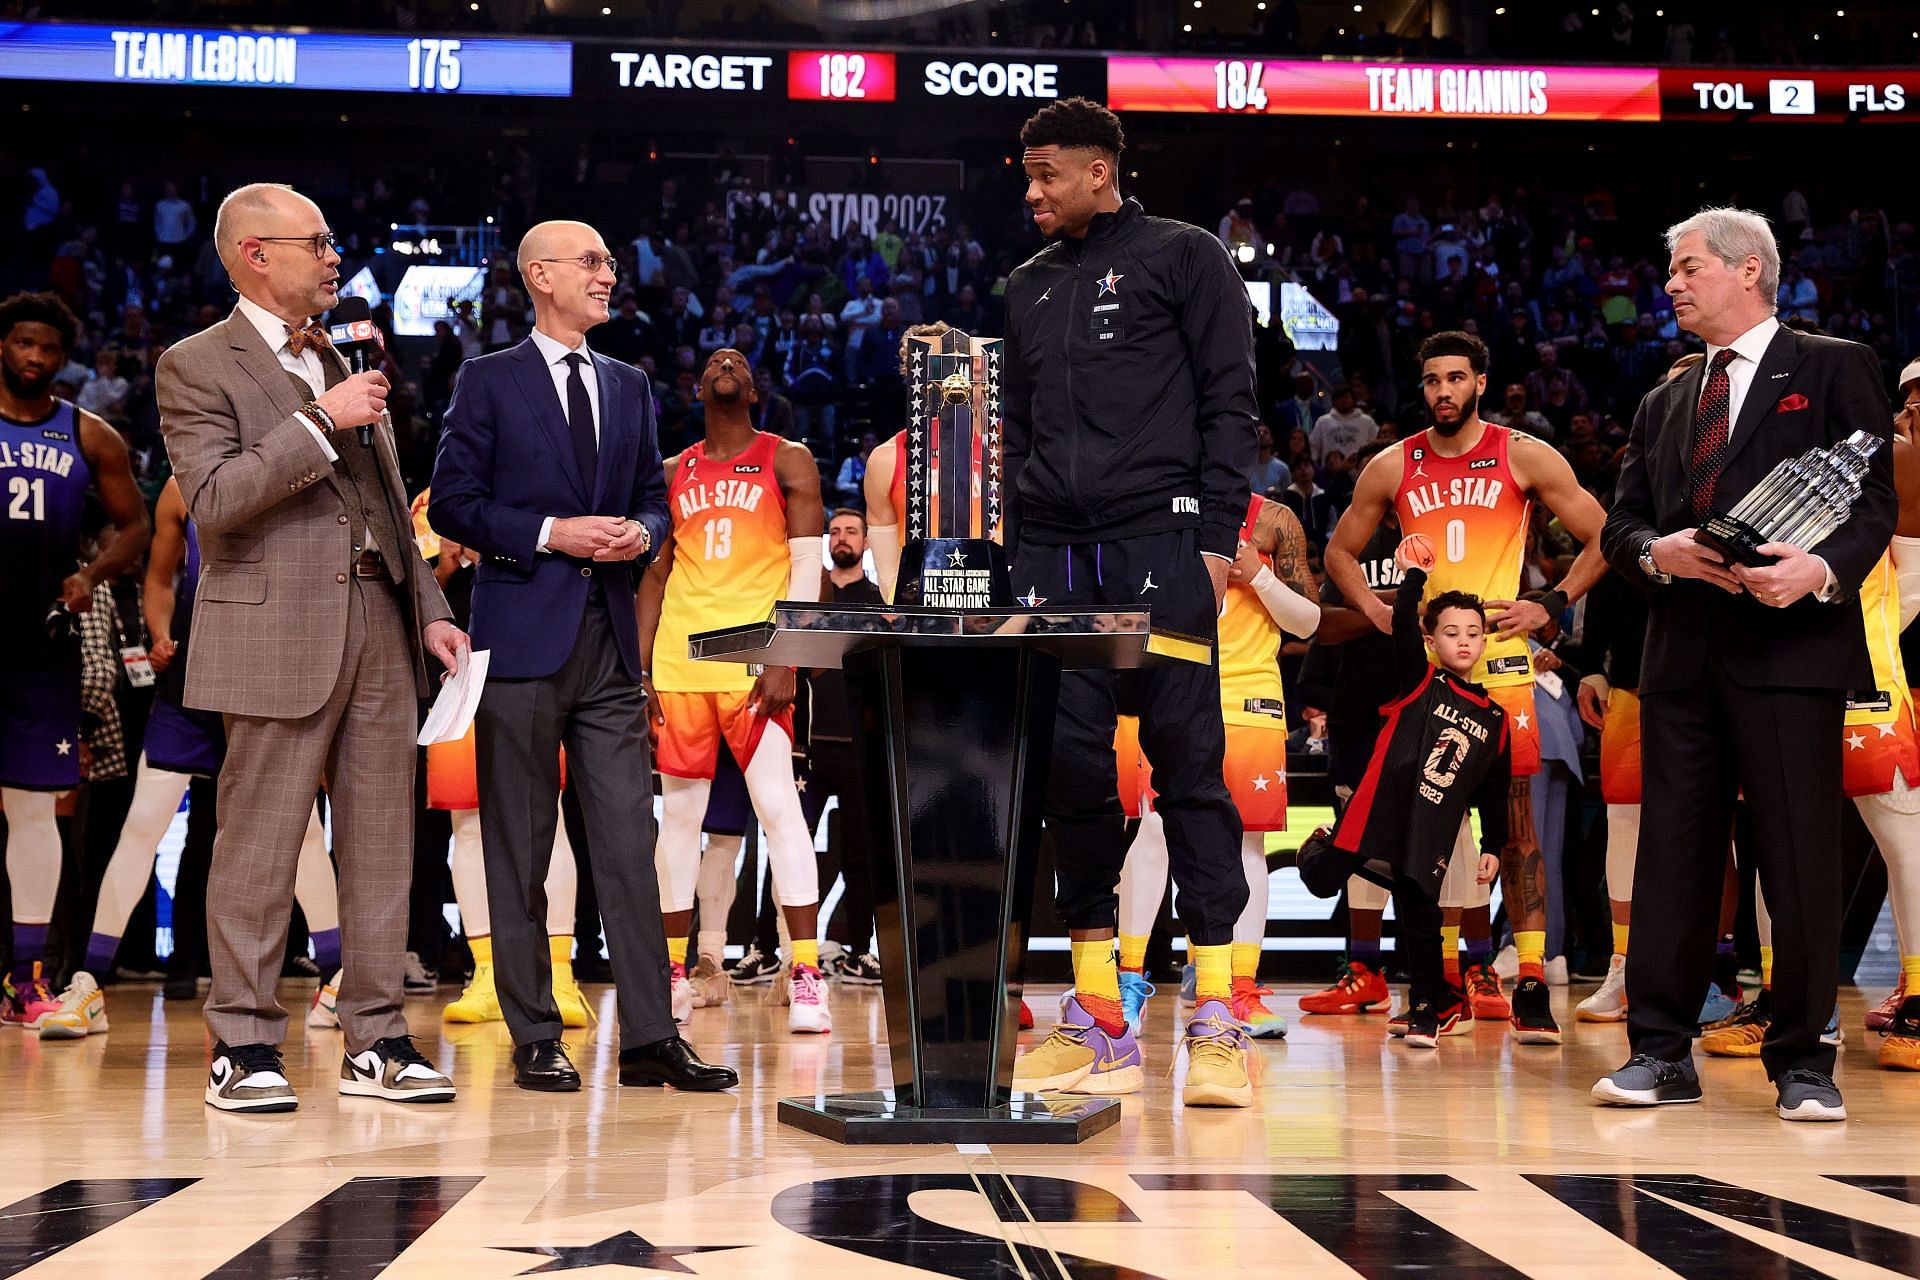 Tickets for NBA Paris Game 2023 to go on sale Nov. 10